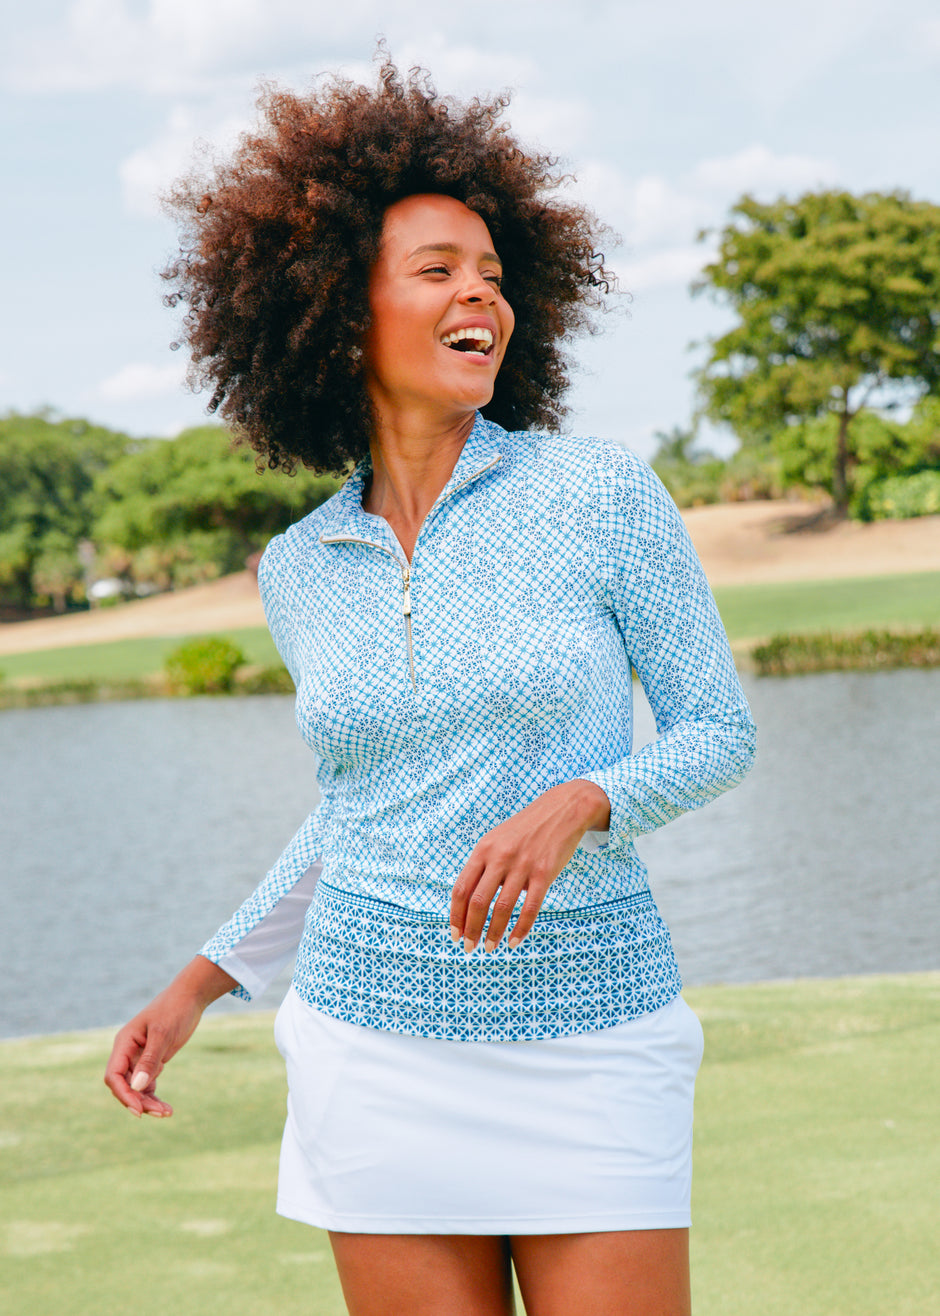 Women's Sun Protective Tops | UPF 50+ | Tops with UV Protection